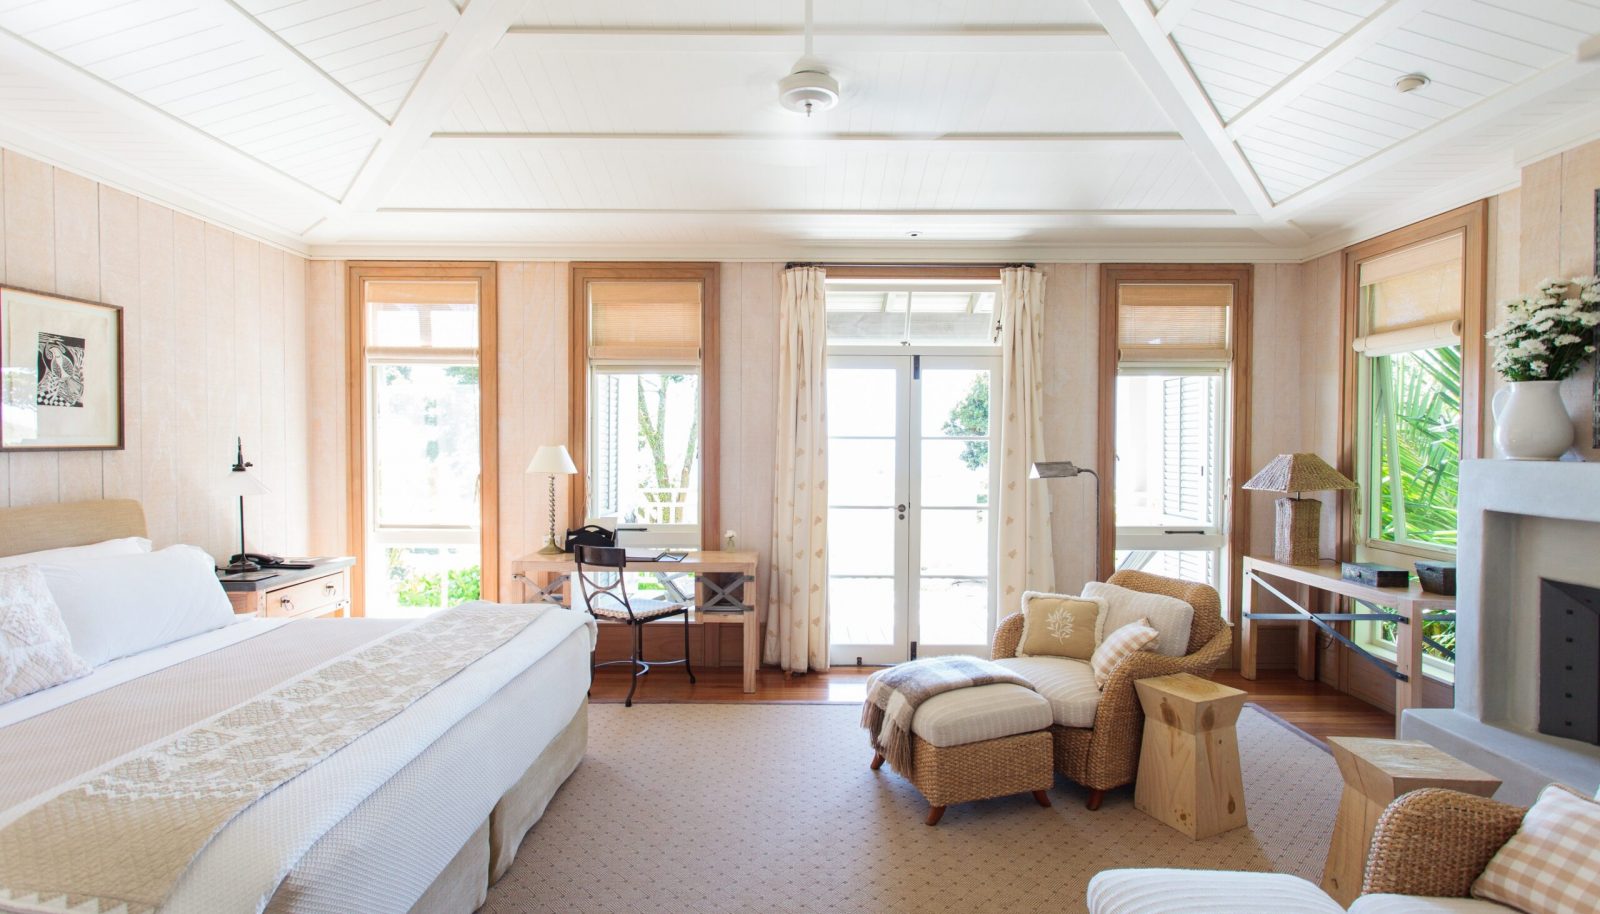 A Deluxe Suite at The Lodge at Kauri Cliffs